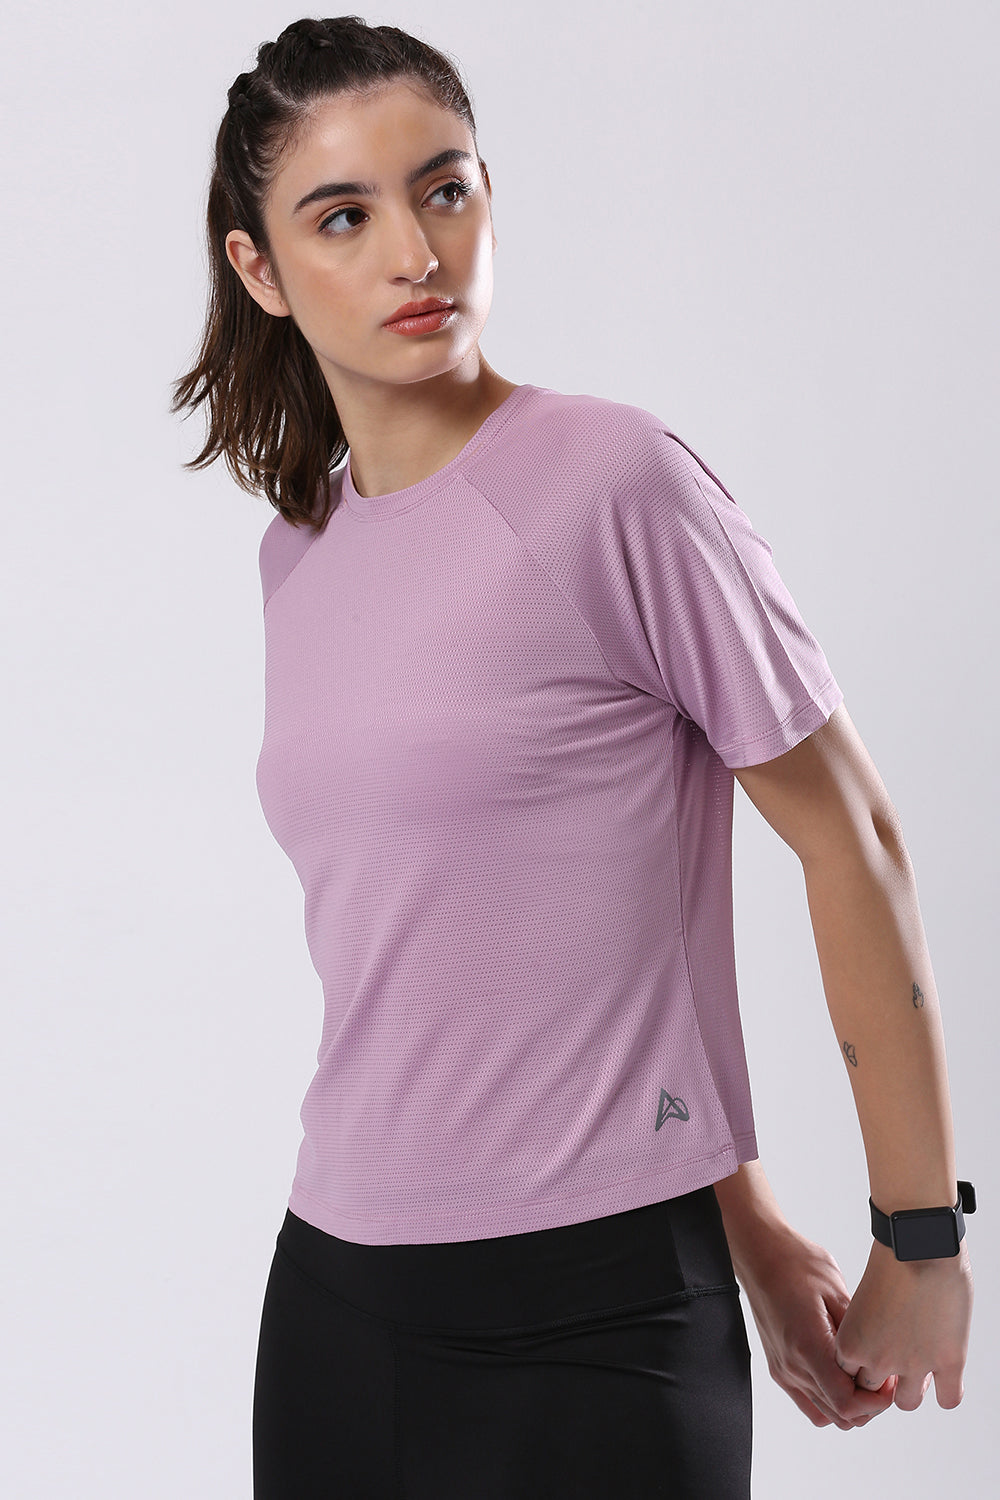 Play Boxy Tee: Elevate Your Active Style